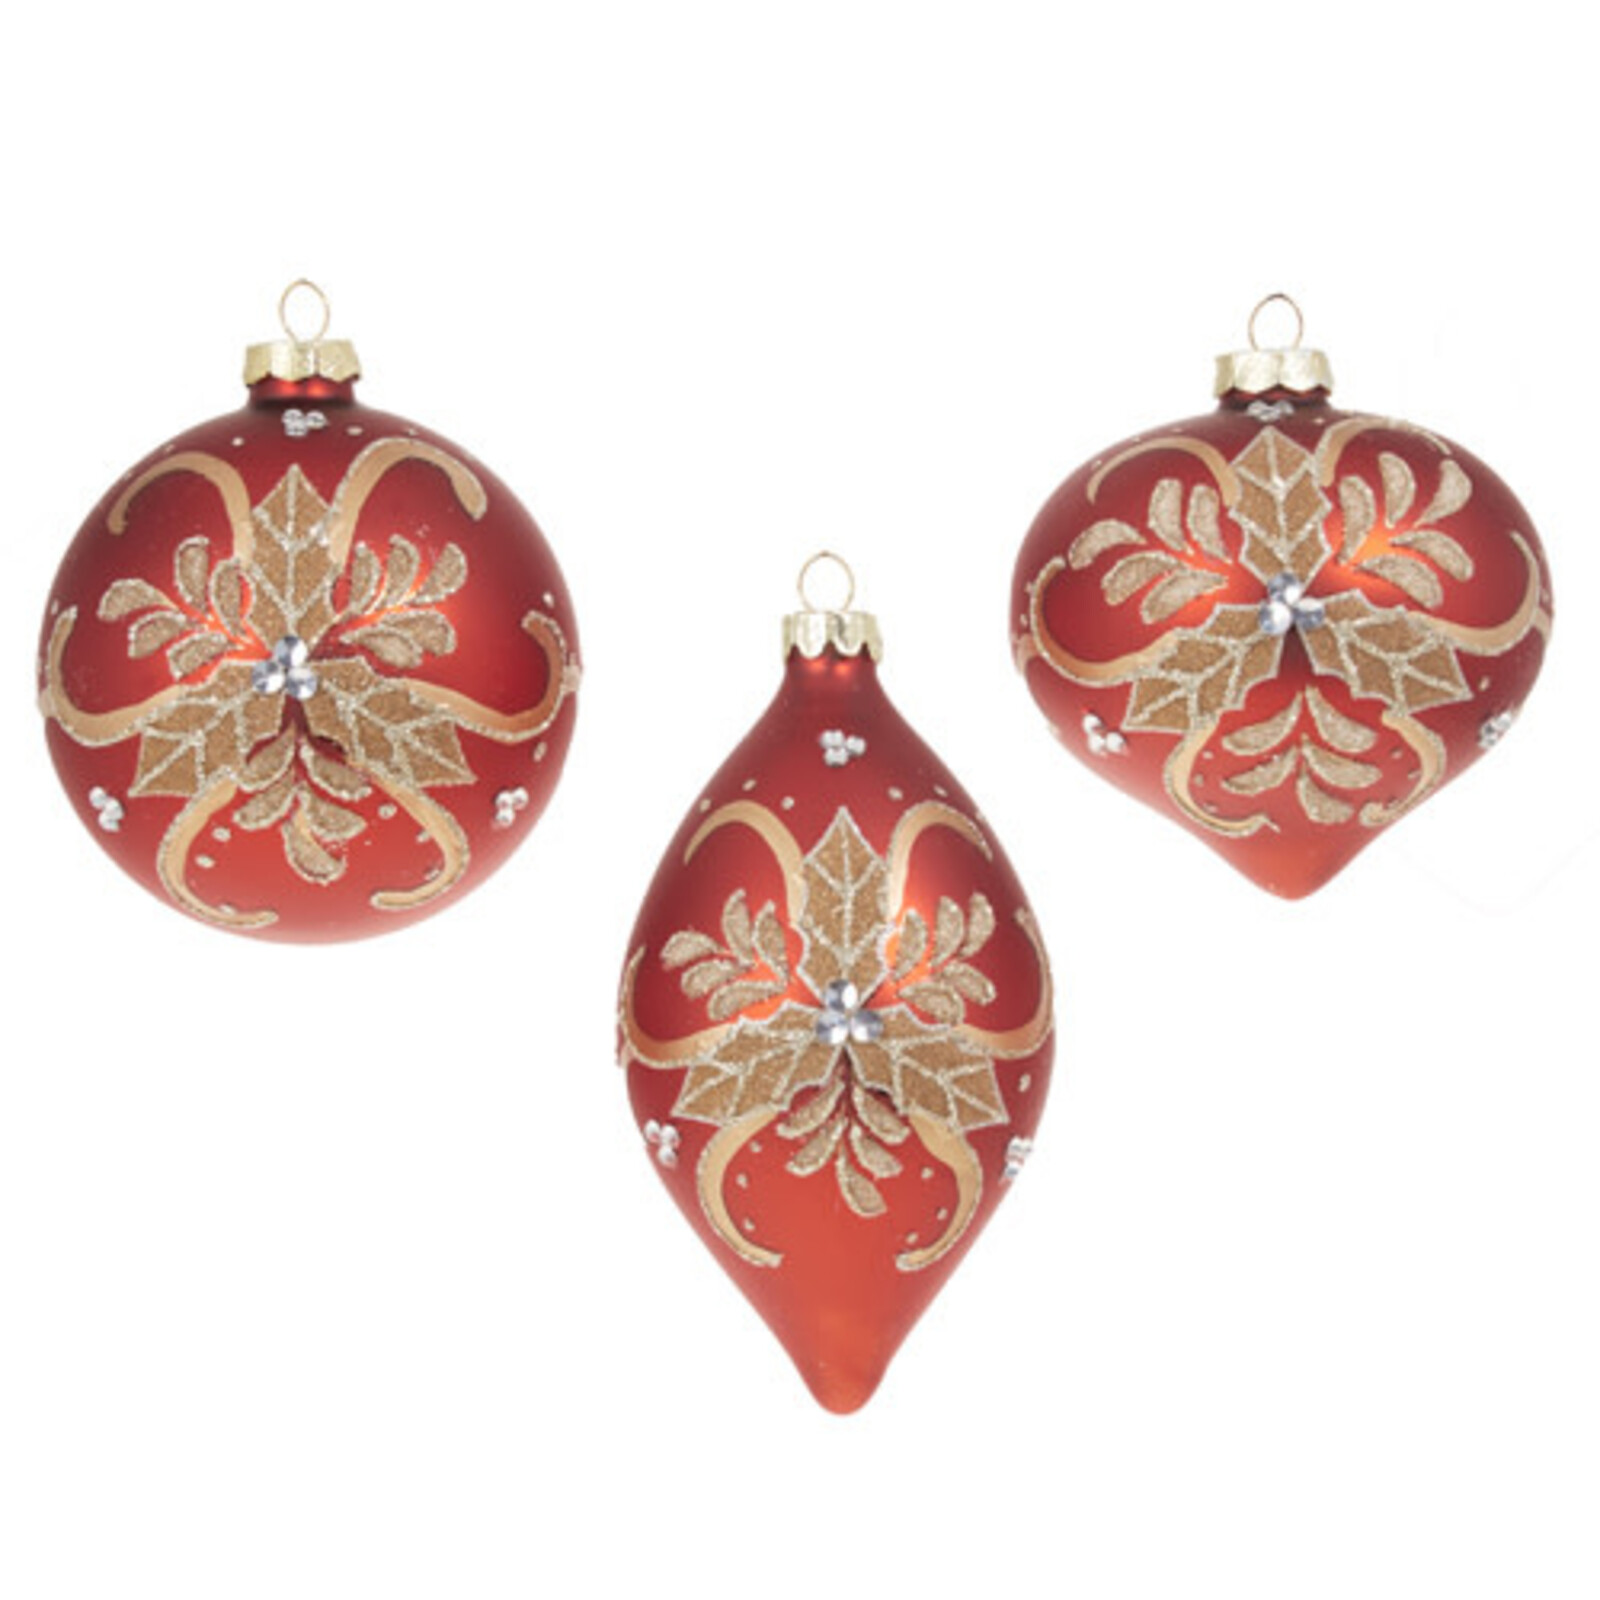 RAZ Imports Inc. 4" RED AND GOLD HOLLY ORNAMENT  4322839 loading=